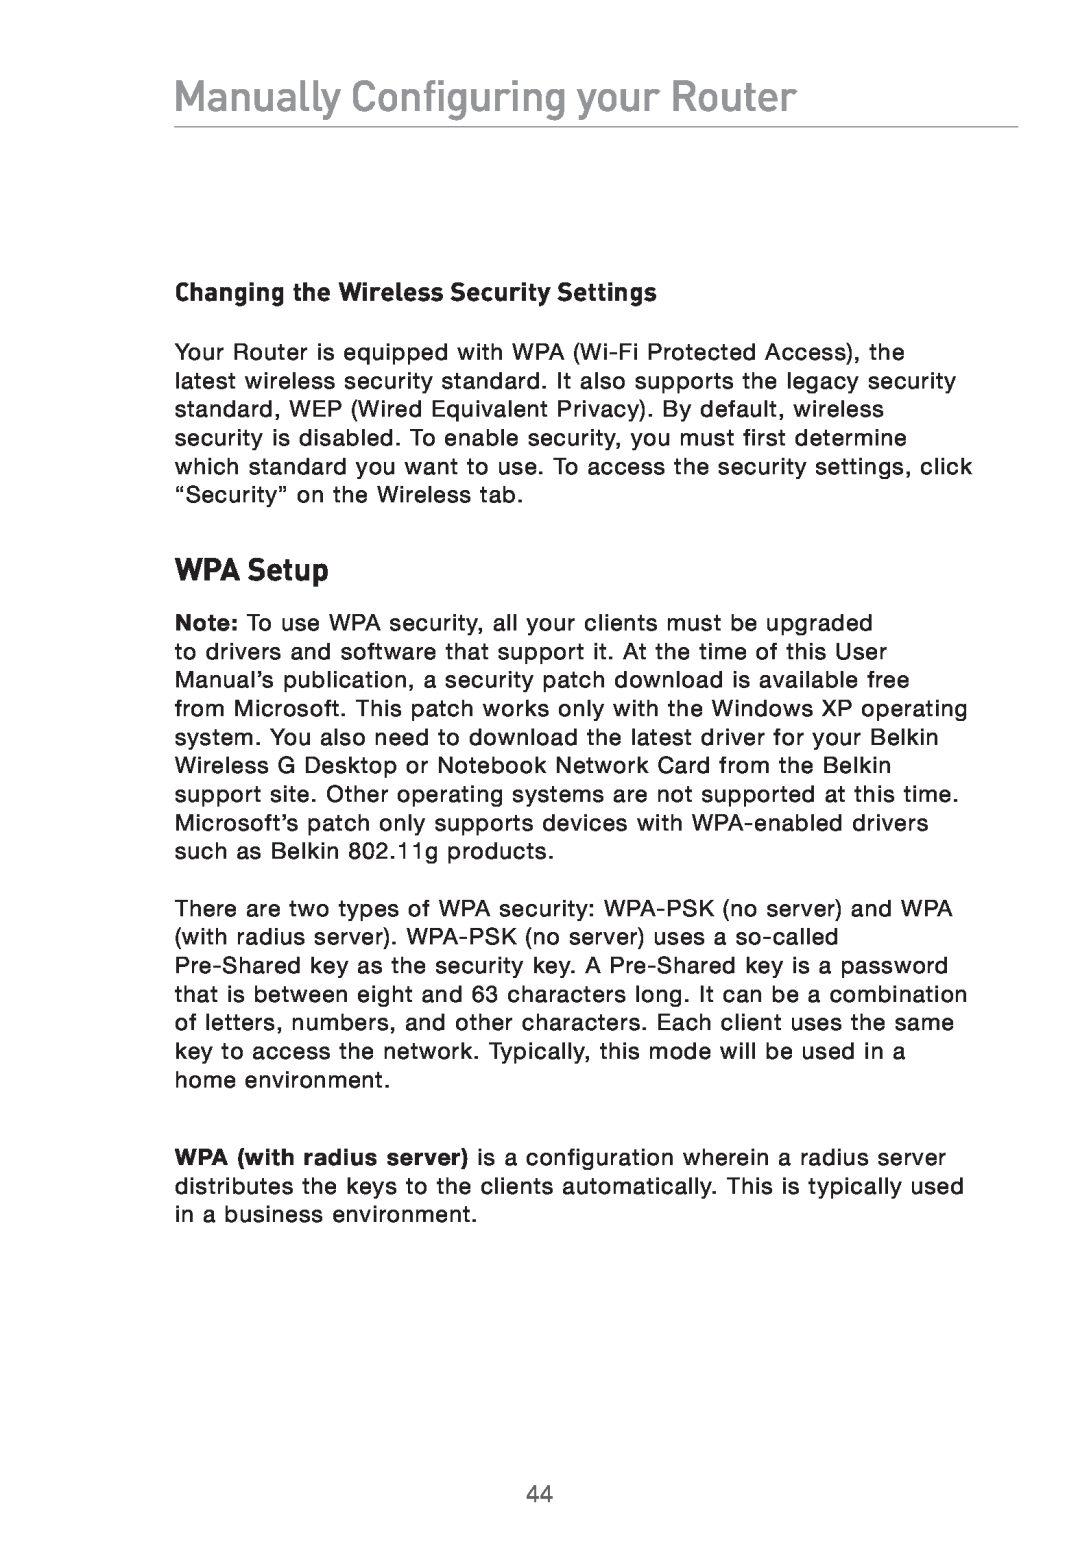 Belkin Pre-N manual WPA Setup, Changing the Wireless Security Settings, Manually Configuring your Router 